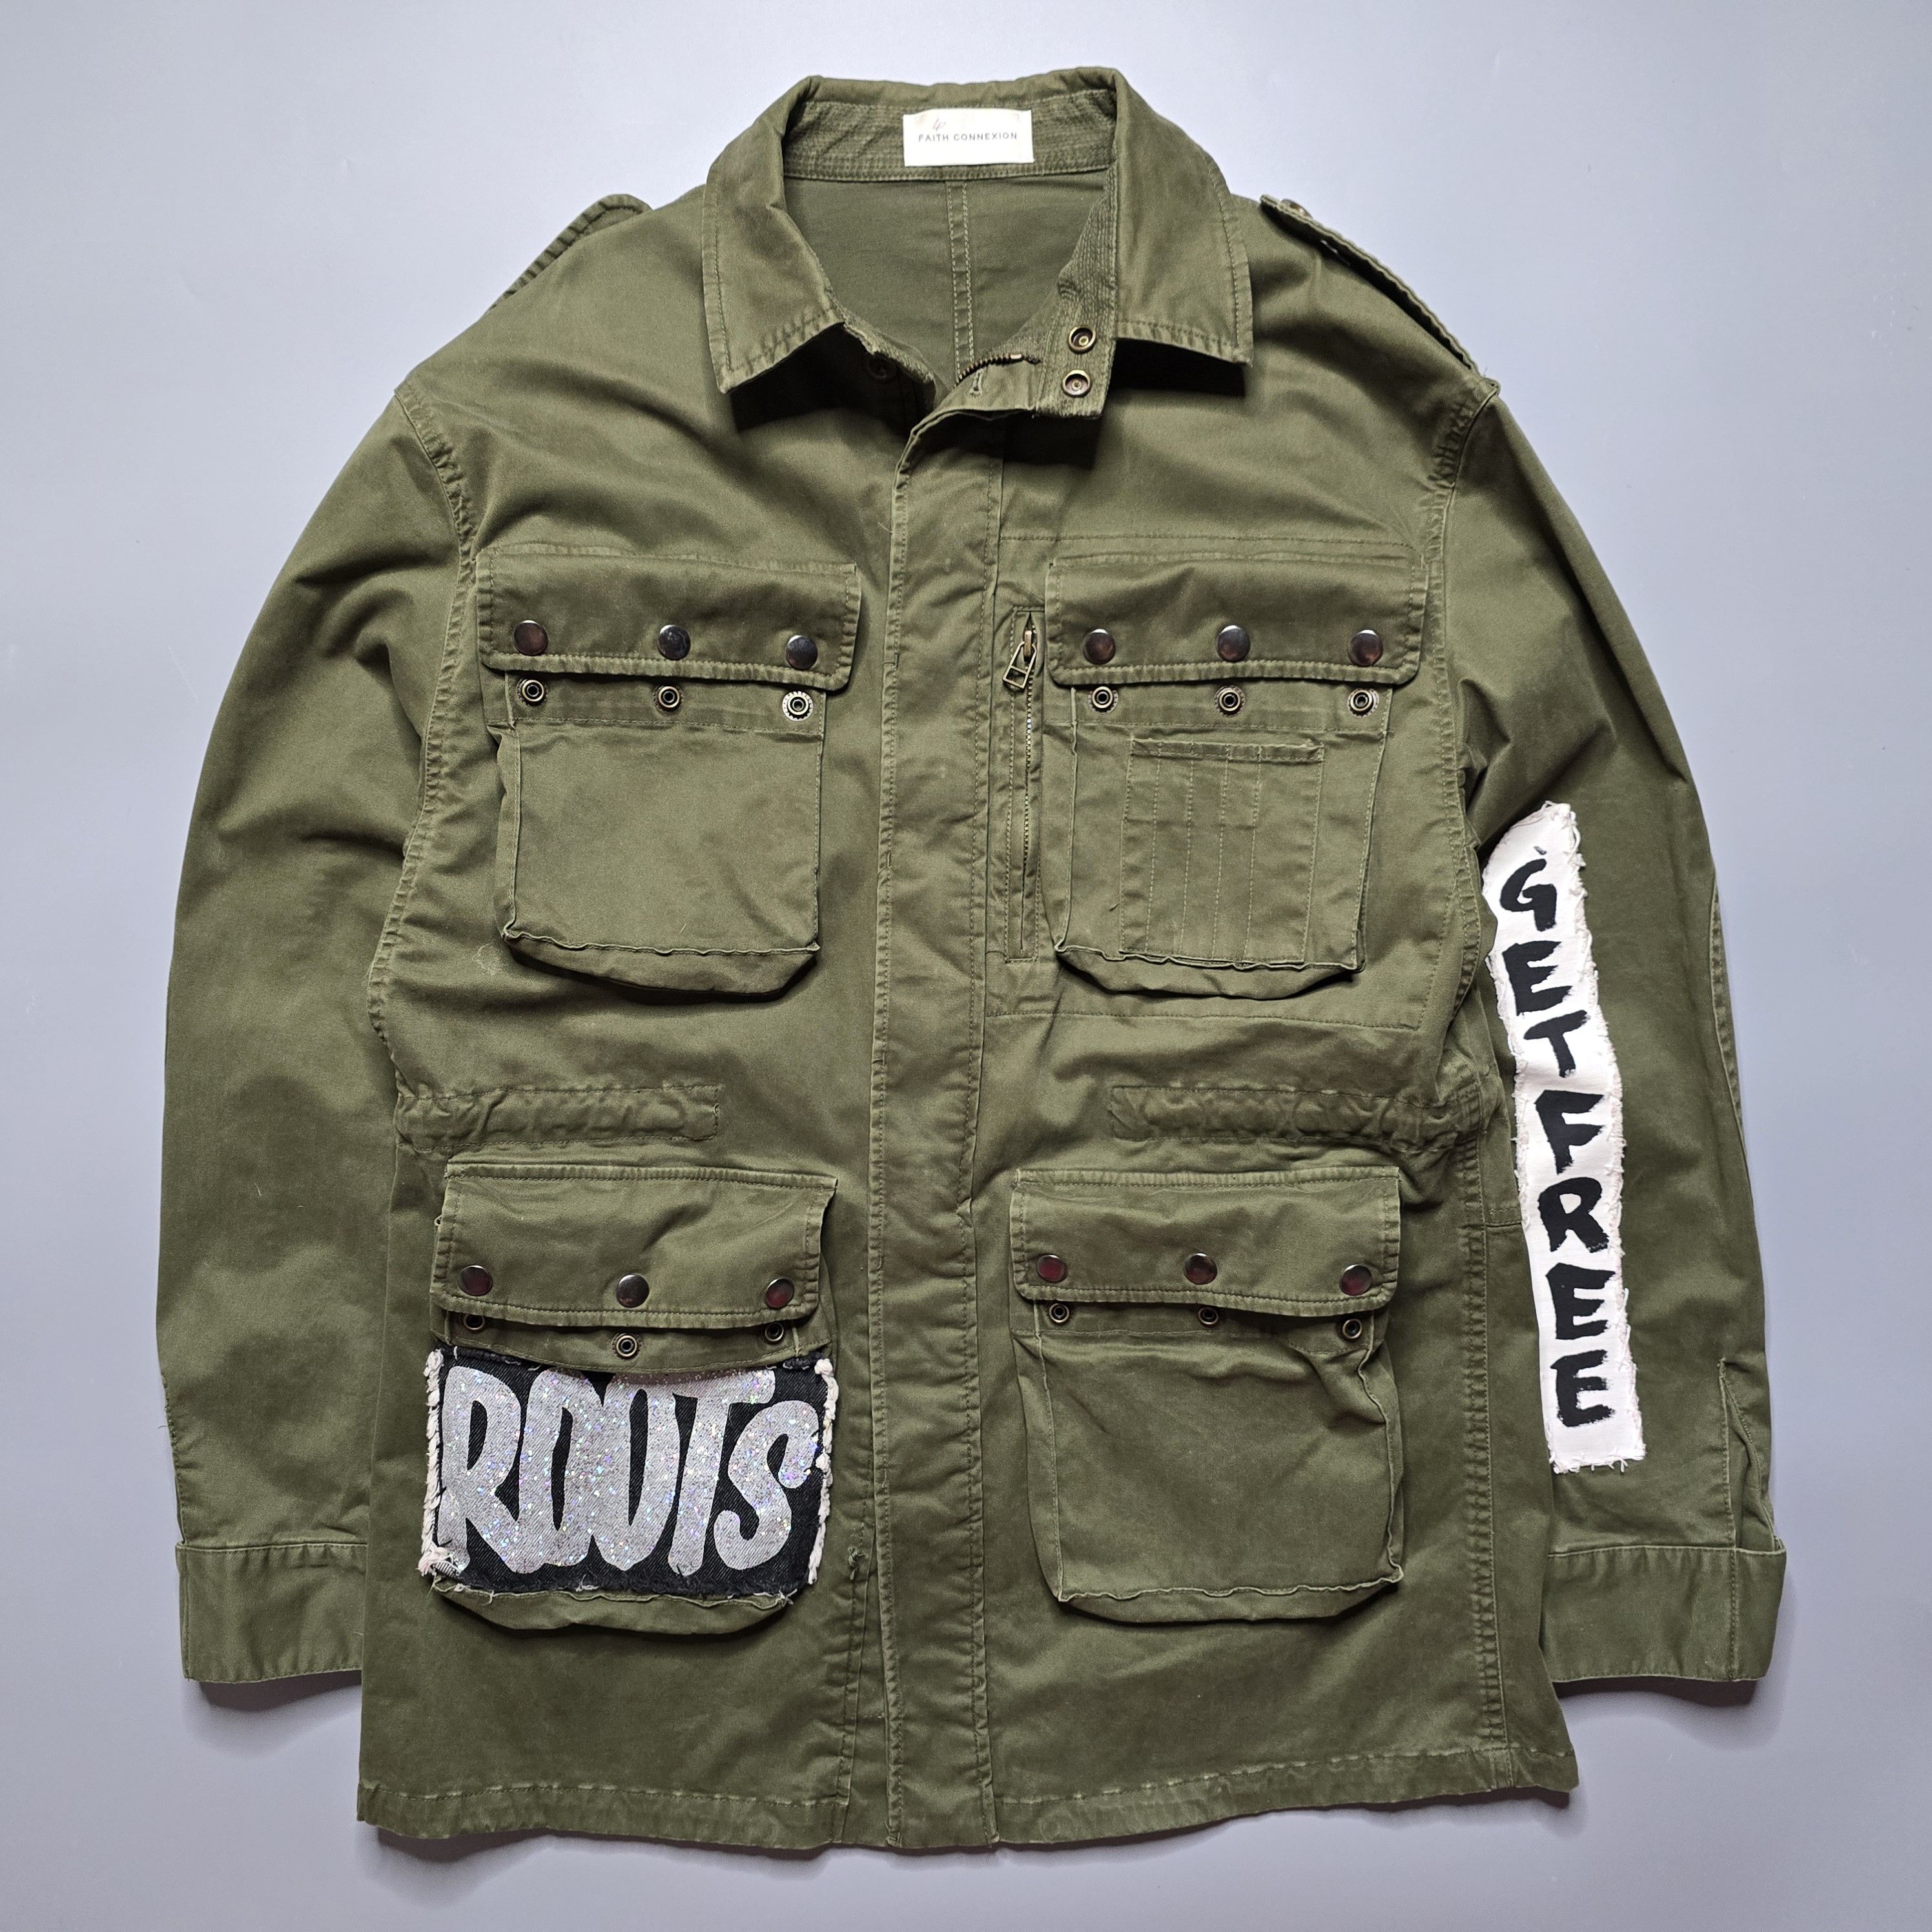 Faith Connexion - Hand-Painted Crown Tag M65 Field Jacket - 1